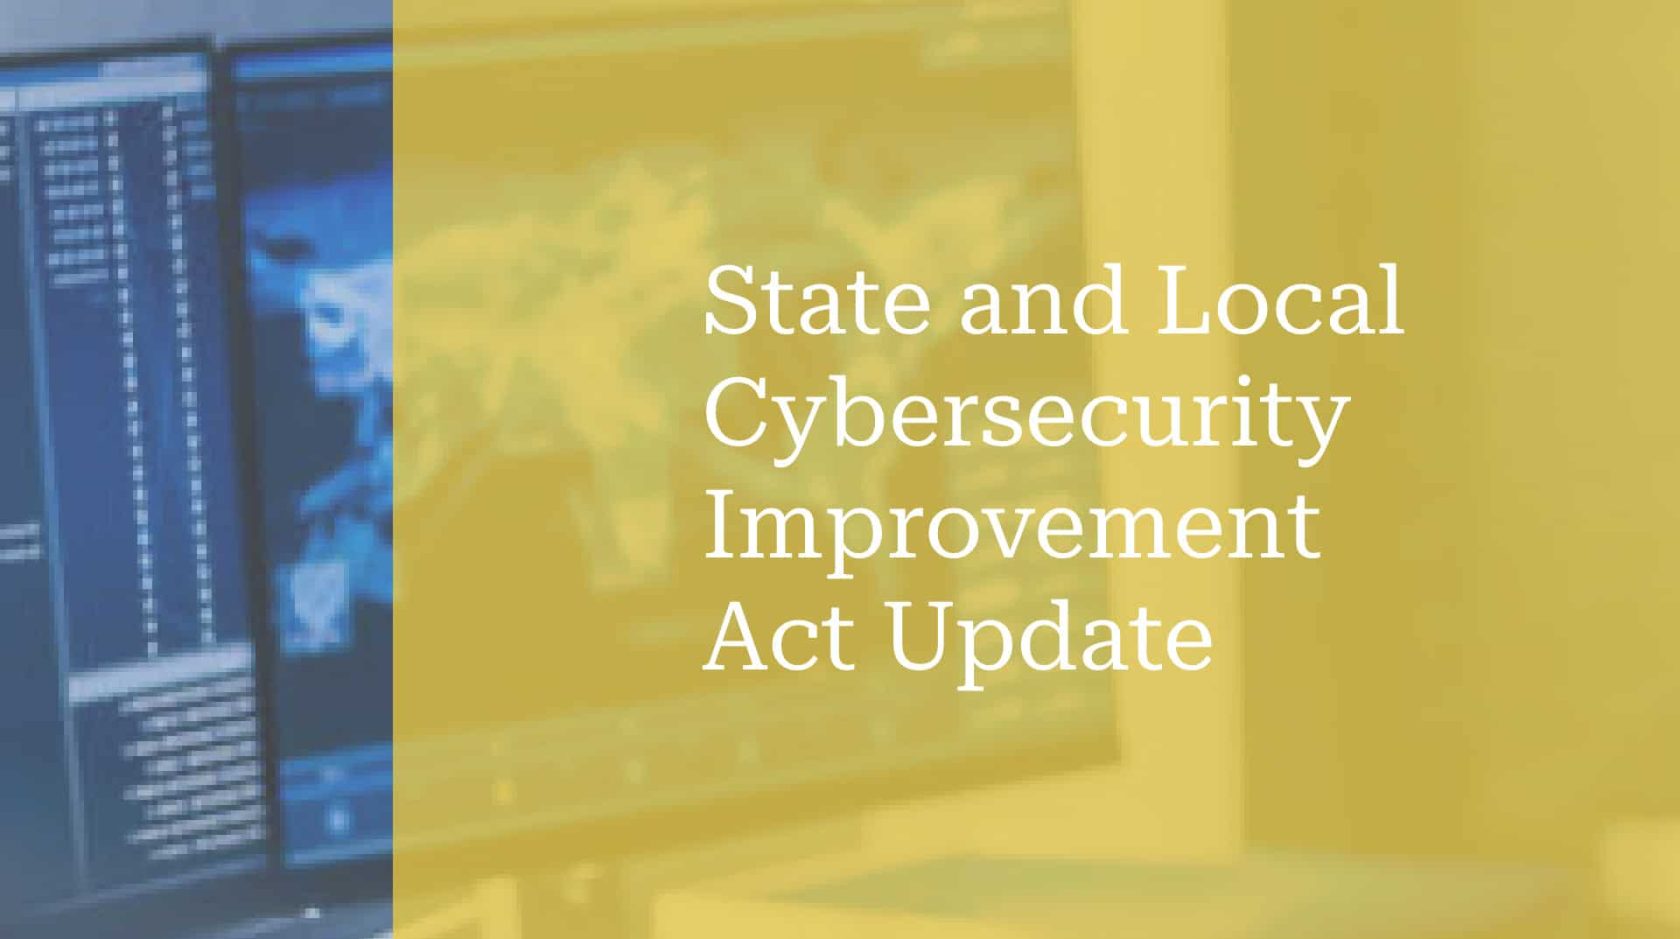 State and Local Cybersecurity Improvement Act Update.